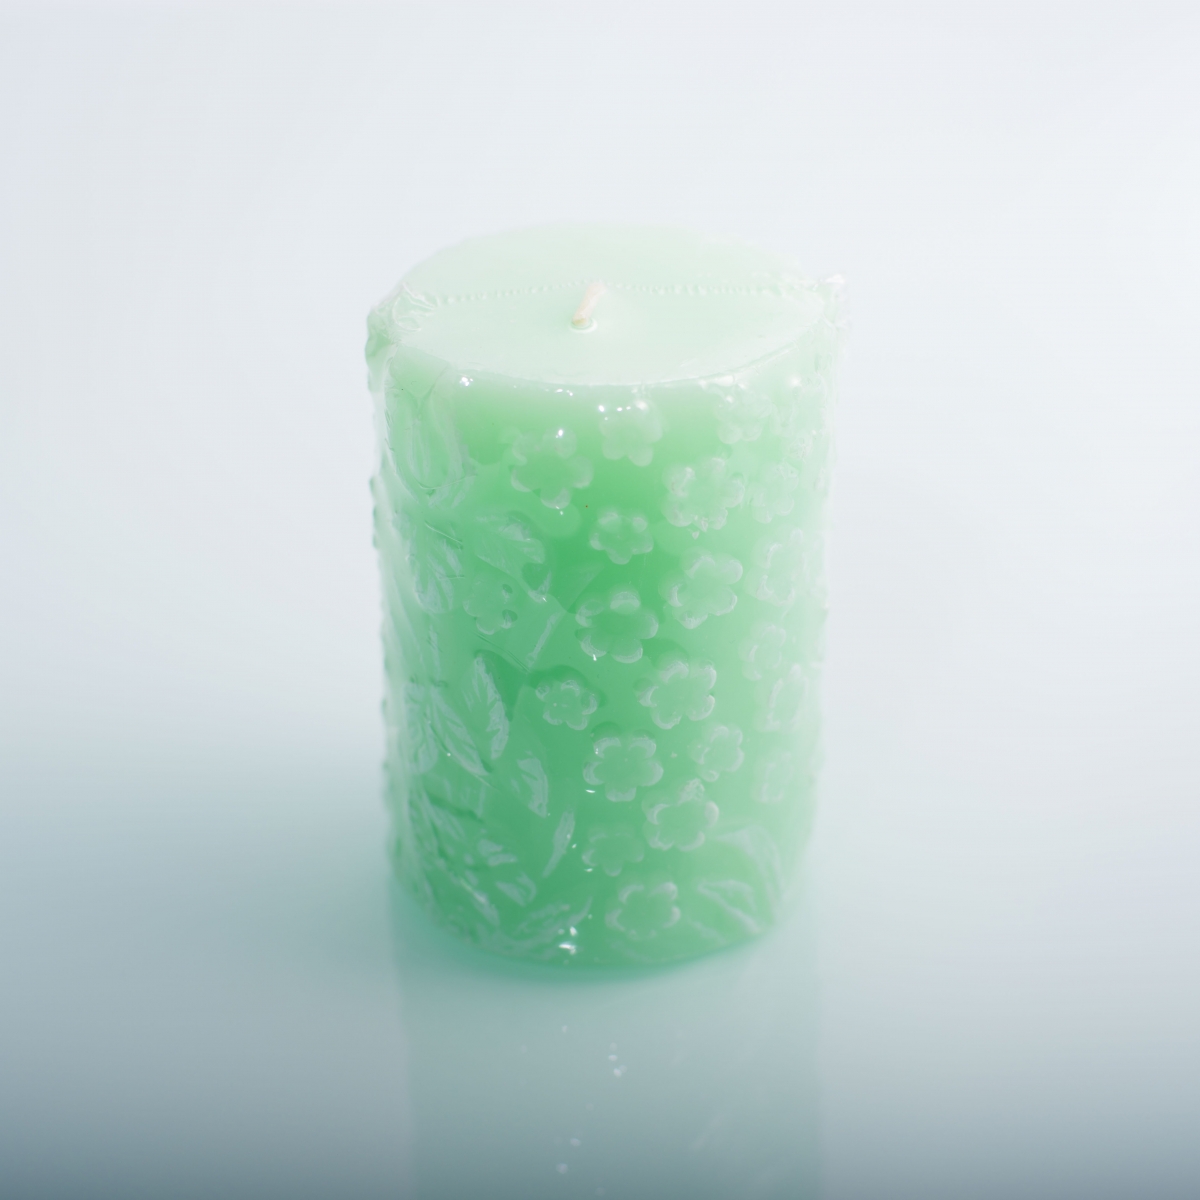 Pillar Candles：Carved Tulip Flower ,Pink ,Green ,Brown Color, Shrink Wrap, China Factory, Best Price, Wholesale-HOWCANDLE-Candles,Scented Candles,Aromatherapy Candles,Soy Candles,Vegan Candles,Jar Candles,Pillar Candles,Candle Gift Sets,Essential Oils,Reed Diffuser,Candle Holder,